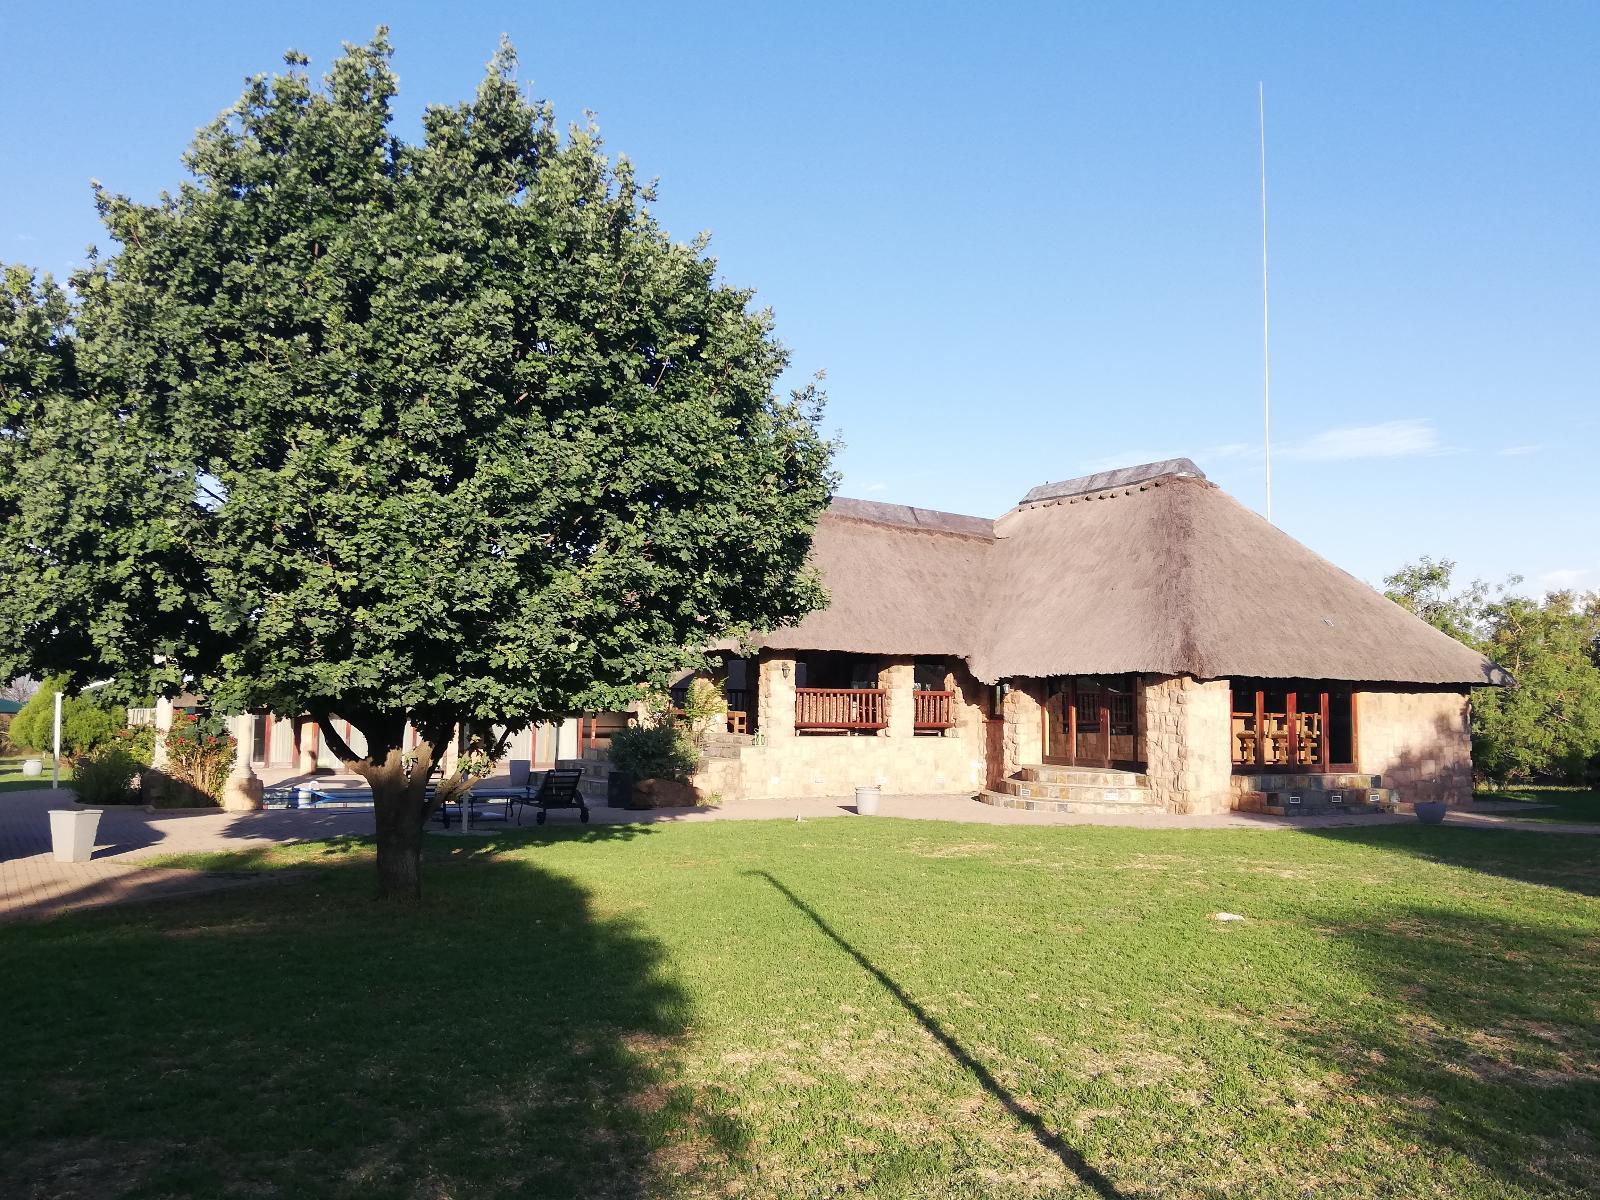 Stone Hounds Lodge Hekpoort Krugersdorp North West Province South Africa Complementary Colors, Building, Architecture